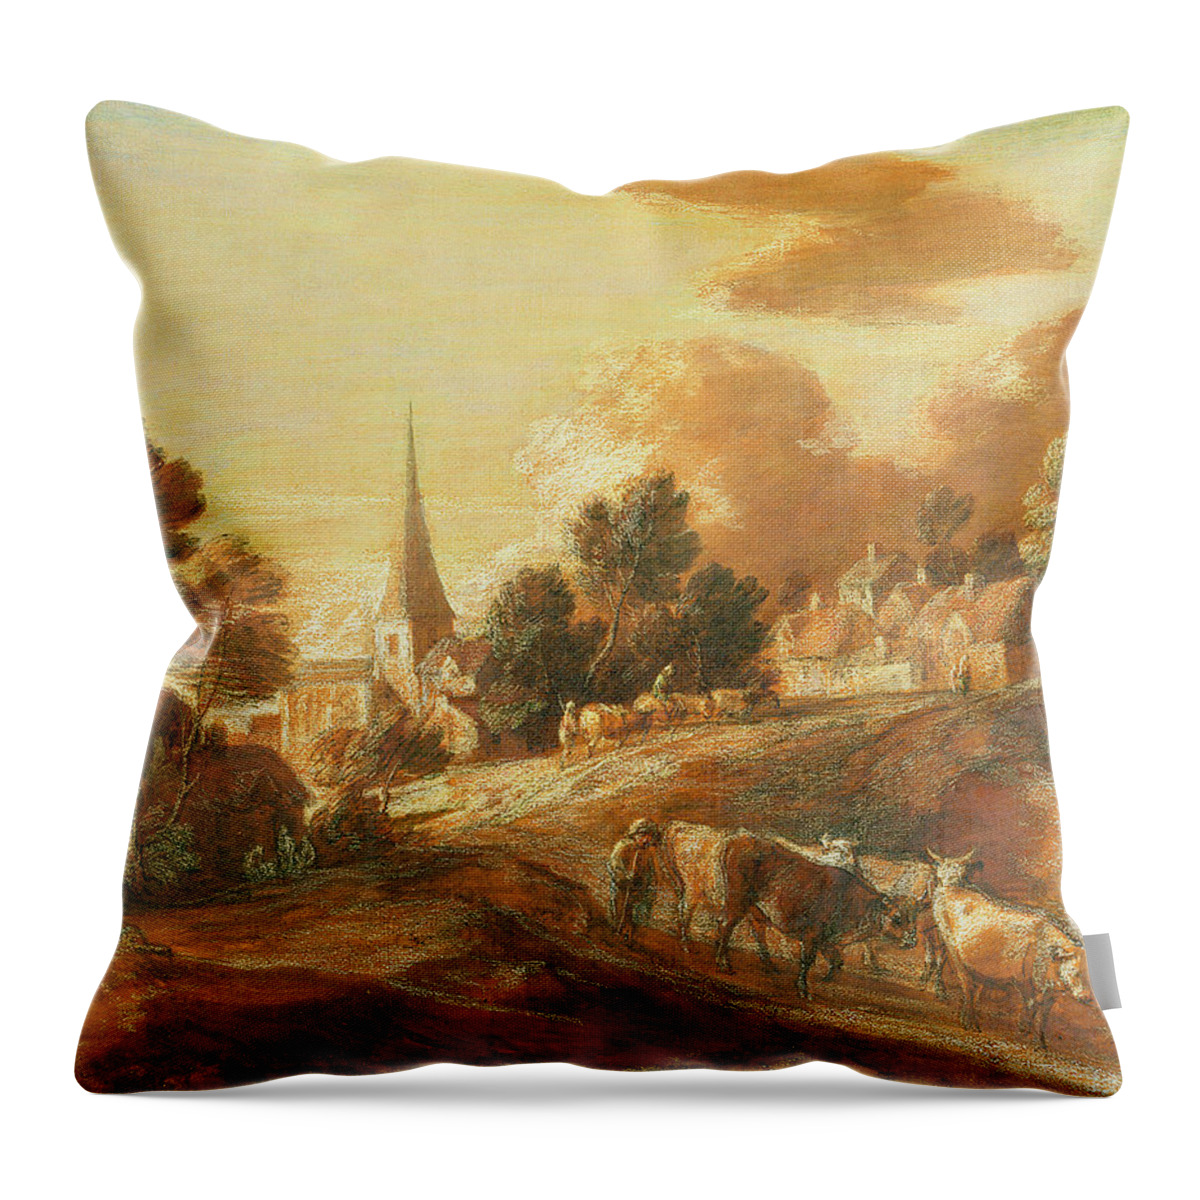 Gainsborough Throw Pillow featuring the painting An Imaginary Wooded Village with Drovers and Cattle by Thomas Gainsborough